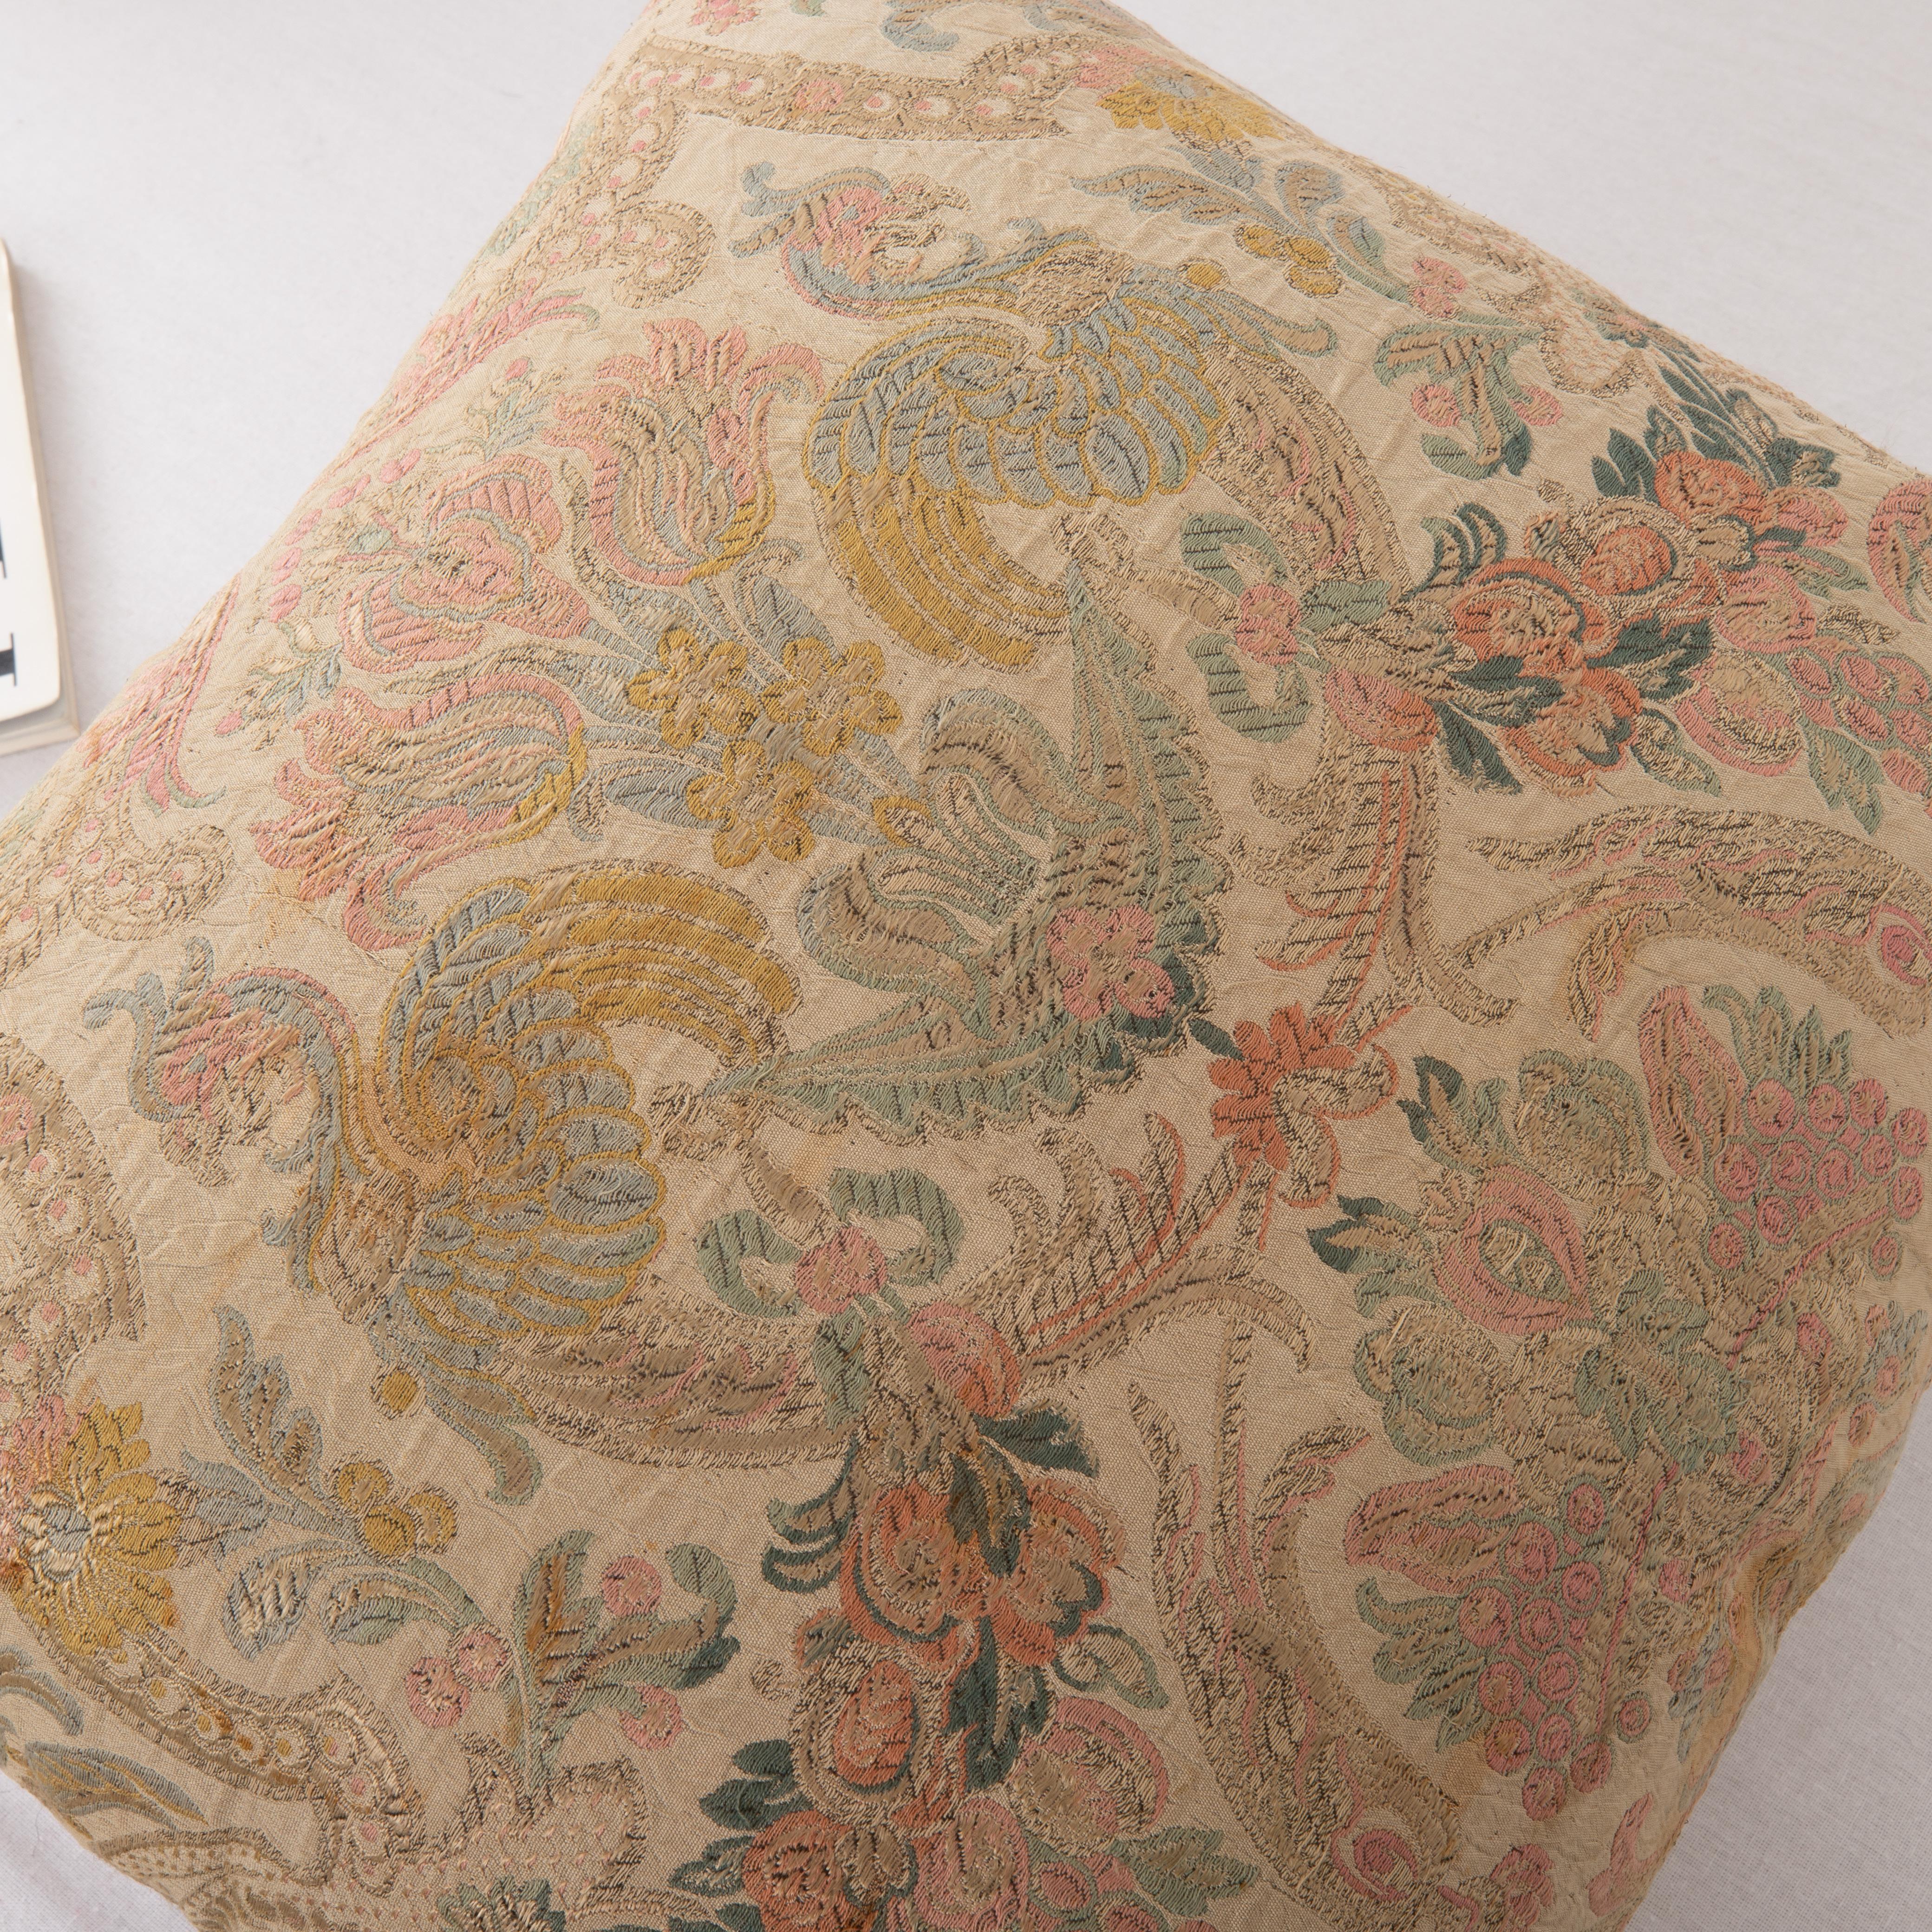 Woven Pillow Cover Made from an Early 20th C. European Textile For Sale